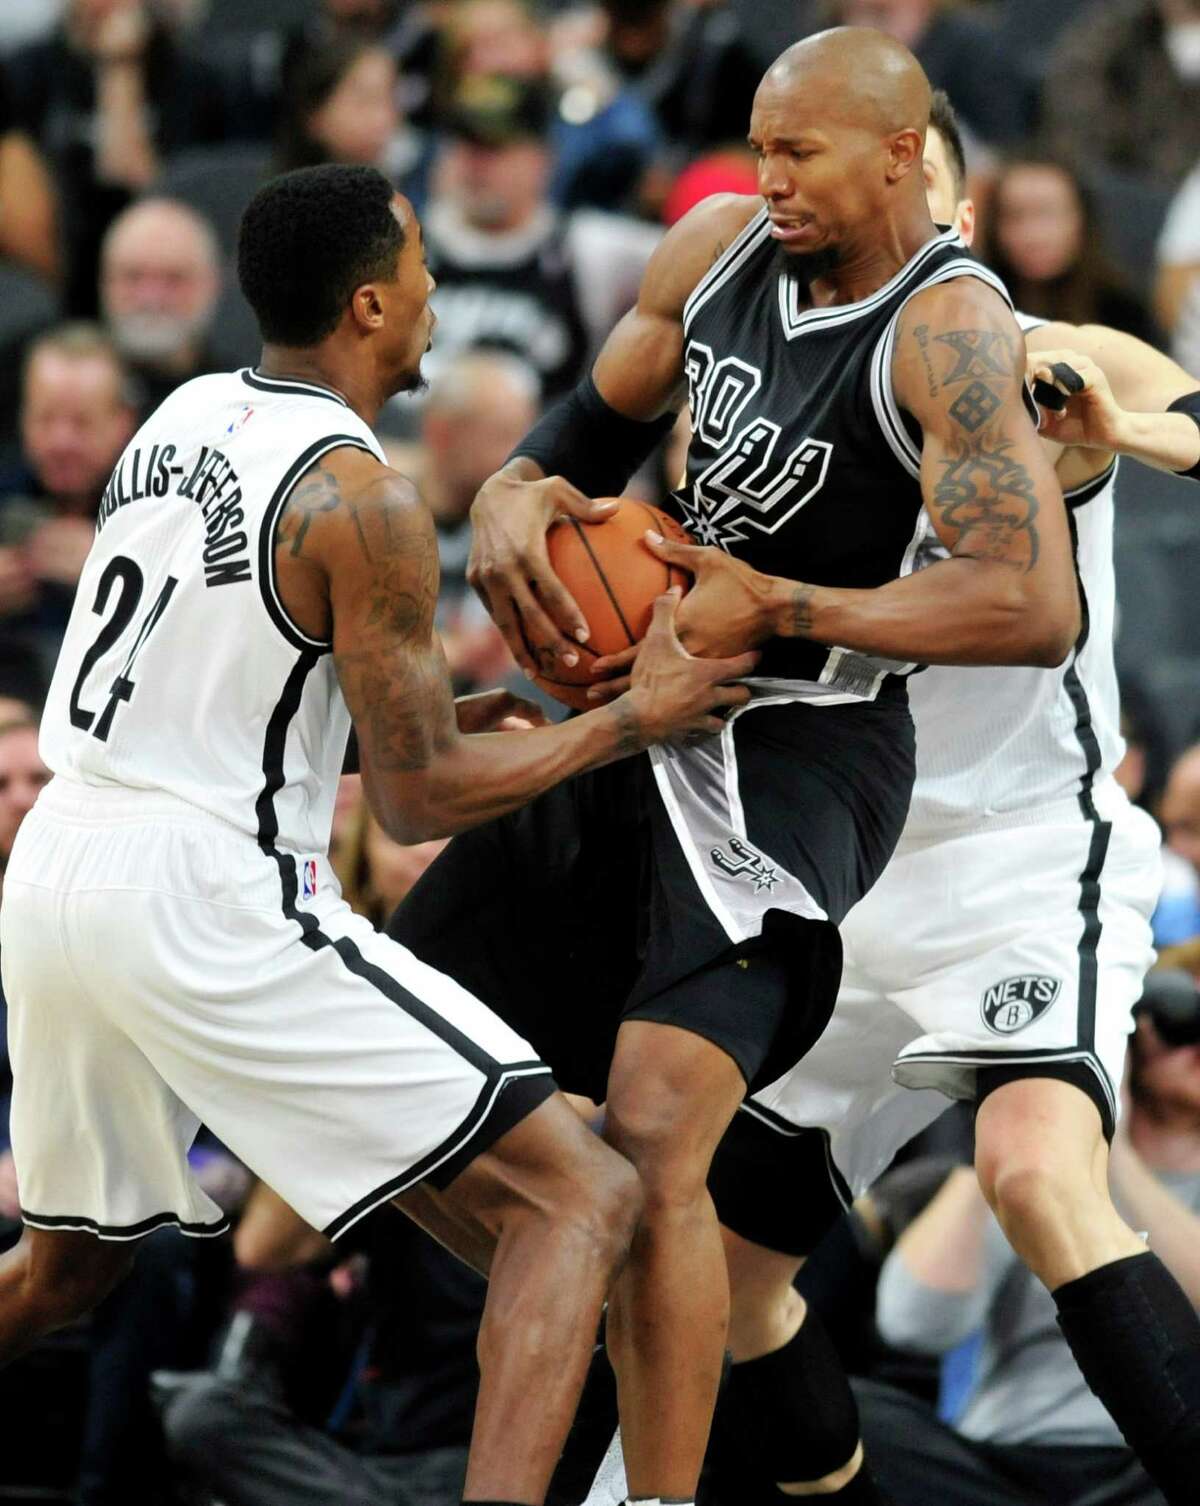 Brooklyn Nets forward Rondae Hollis-Jefferson, left, tries to steal the ball from San Antonio Spurs forward David West in the first half of an NBA basketball game Friday, Oct. 30, 2015, in San Antonio. (AP Photo/Bahram Mark Sobhani)